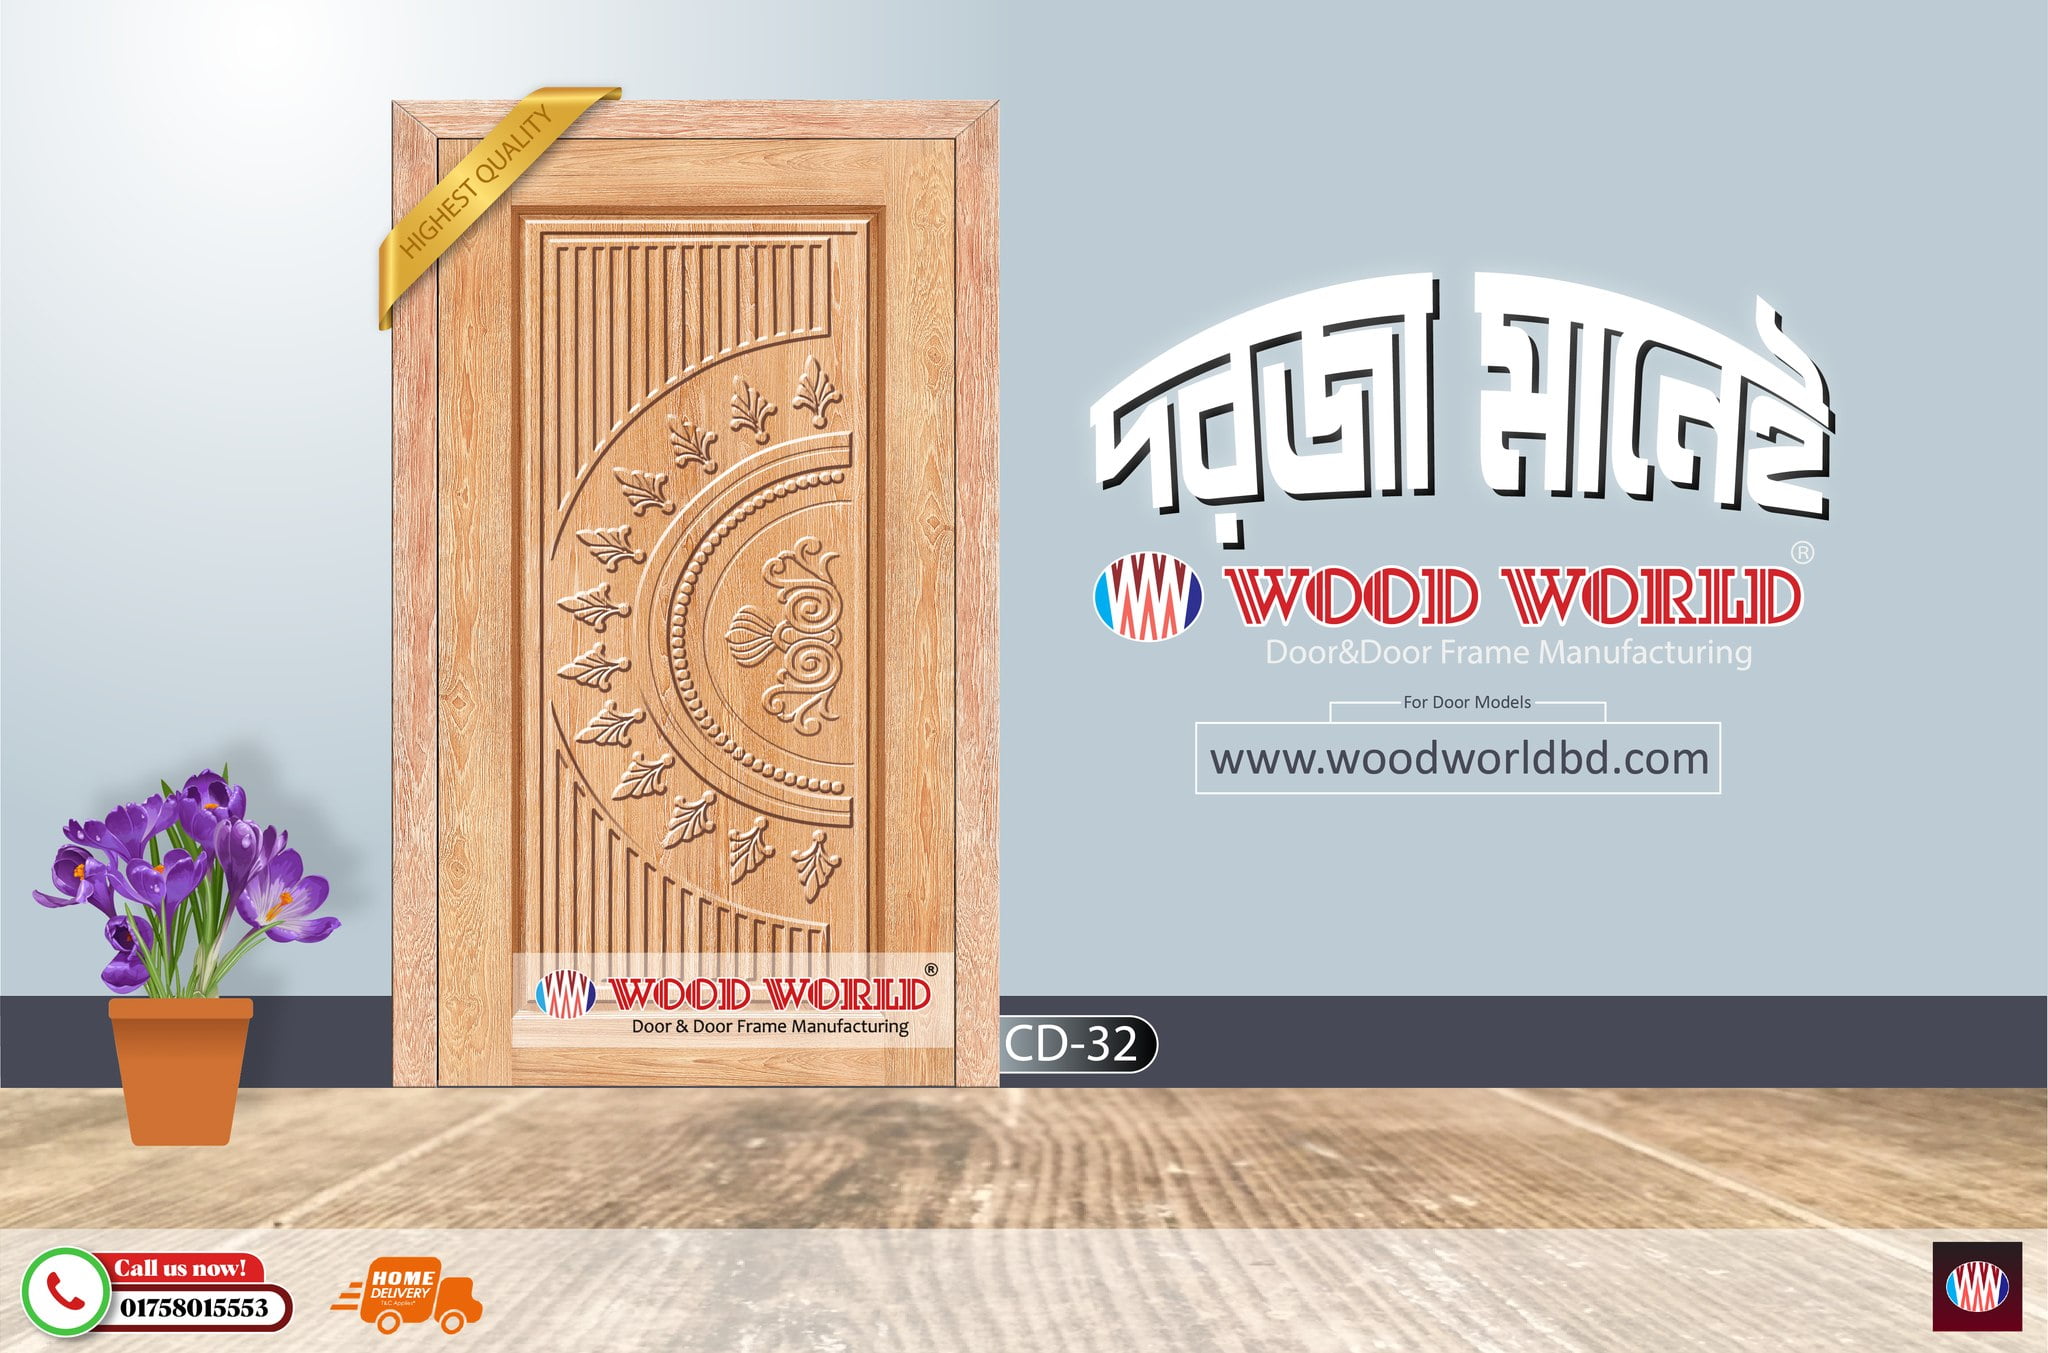 Wood World Bd. | CD-32 | Best quality wooden door produced with highest quality timber. We located in Bangladesh Dhaka.